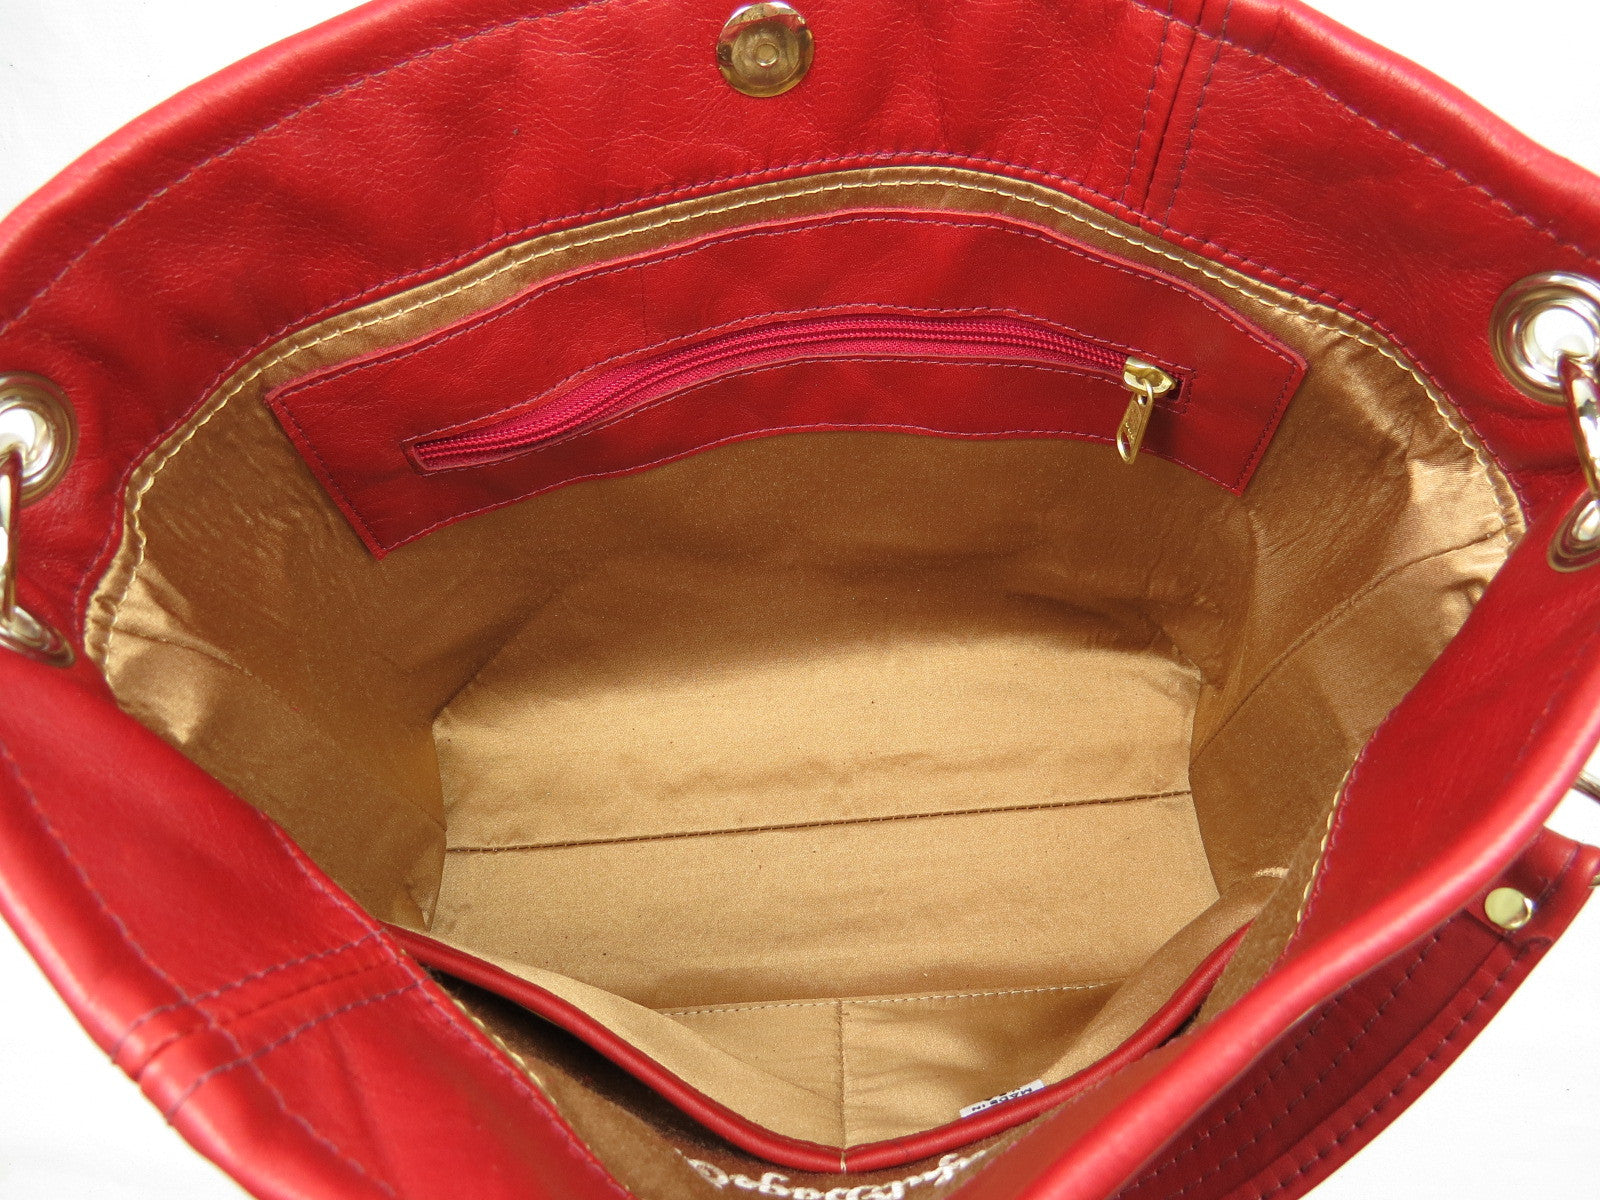 Valentine Hearts Red and White Slouchy Hobo Leather Bag interior zipper pocket